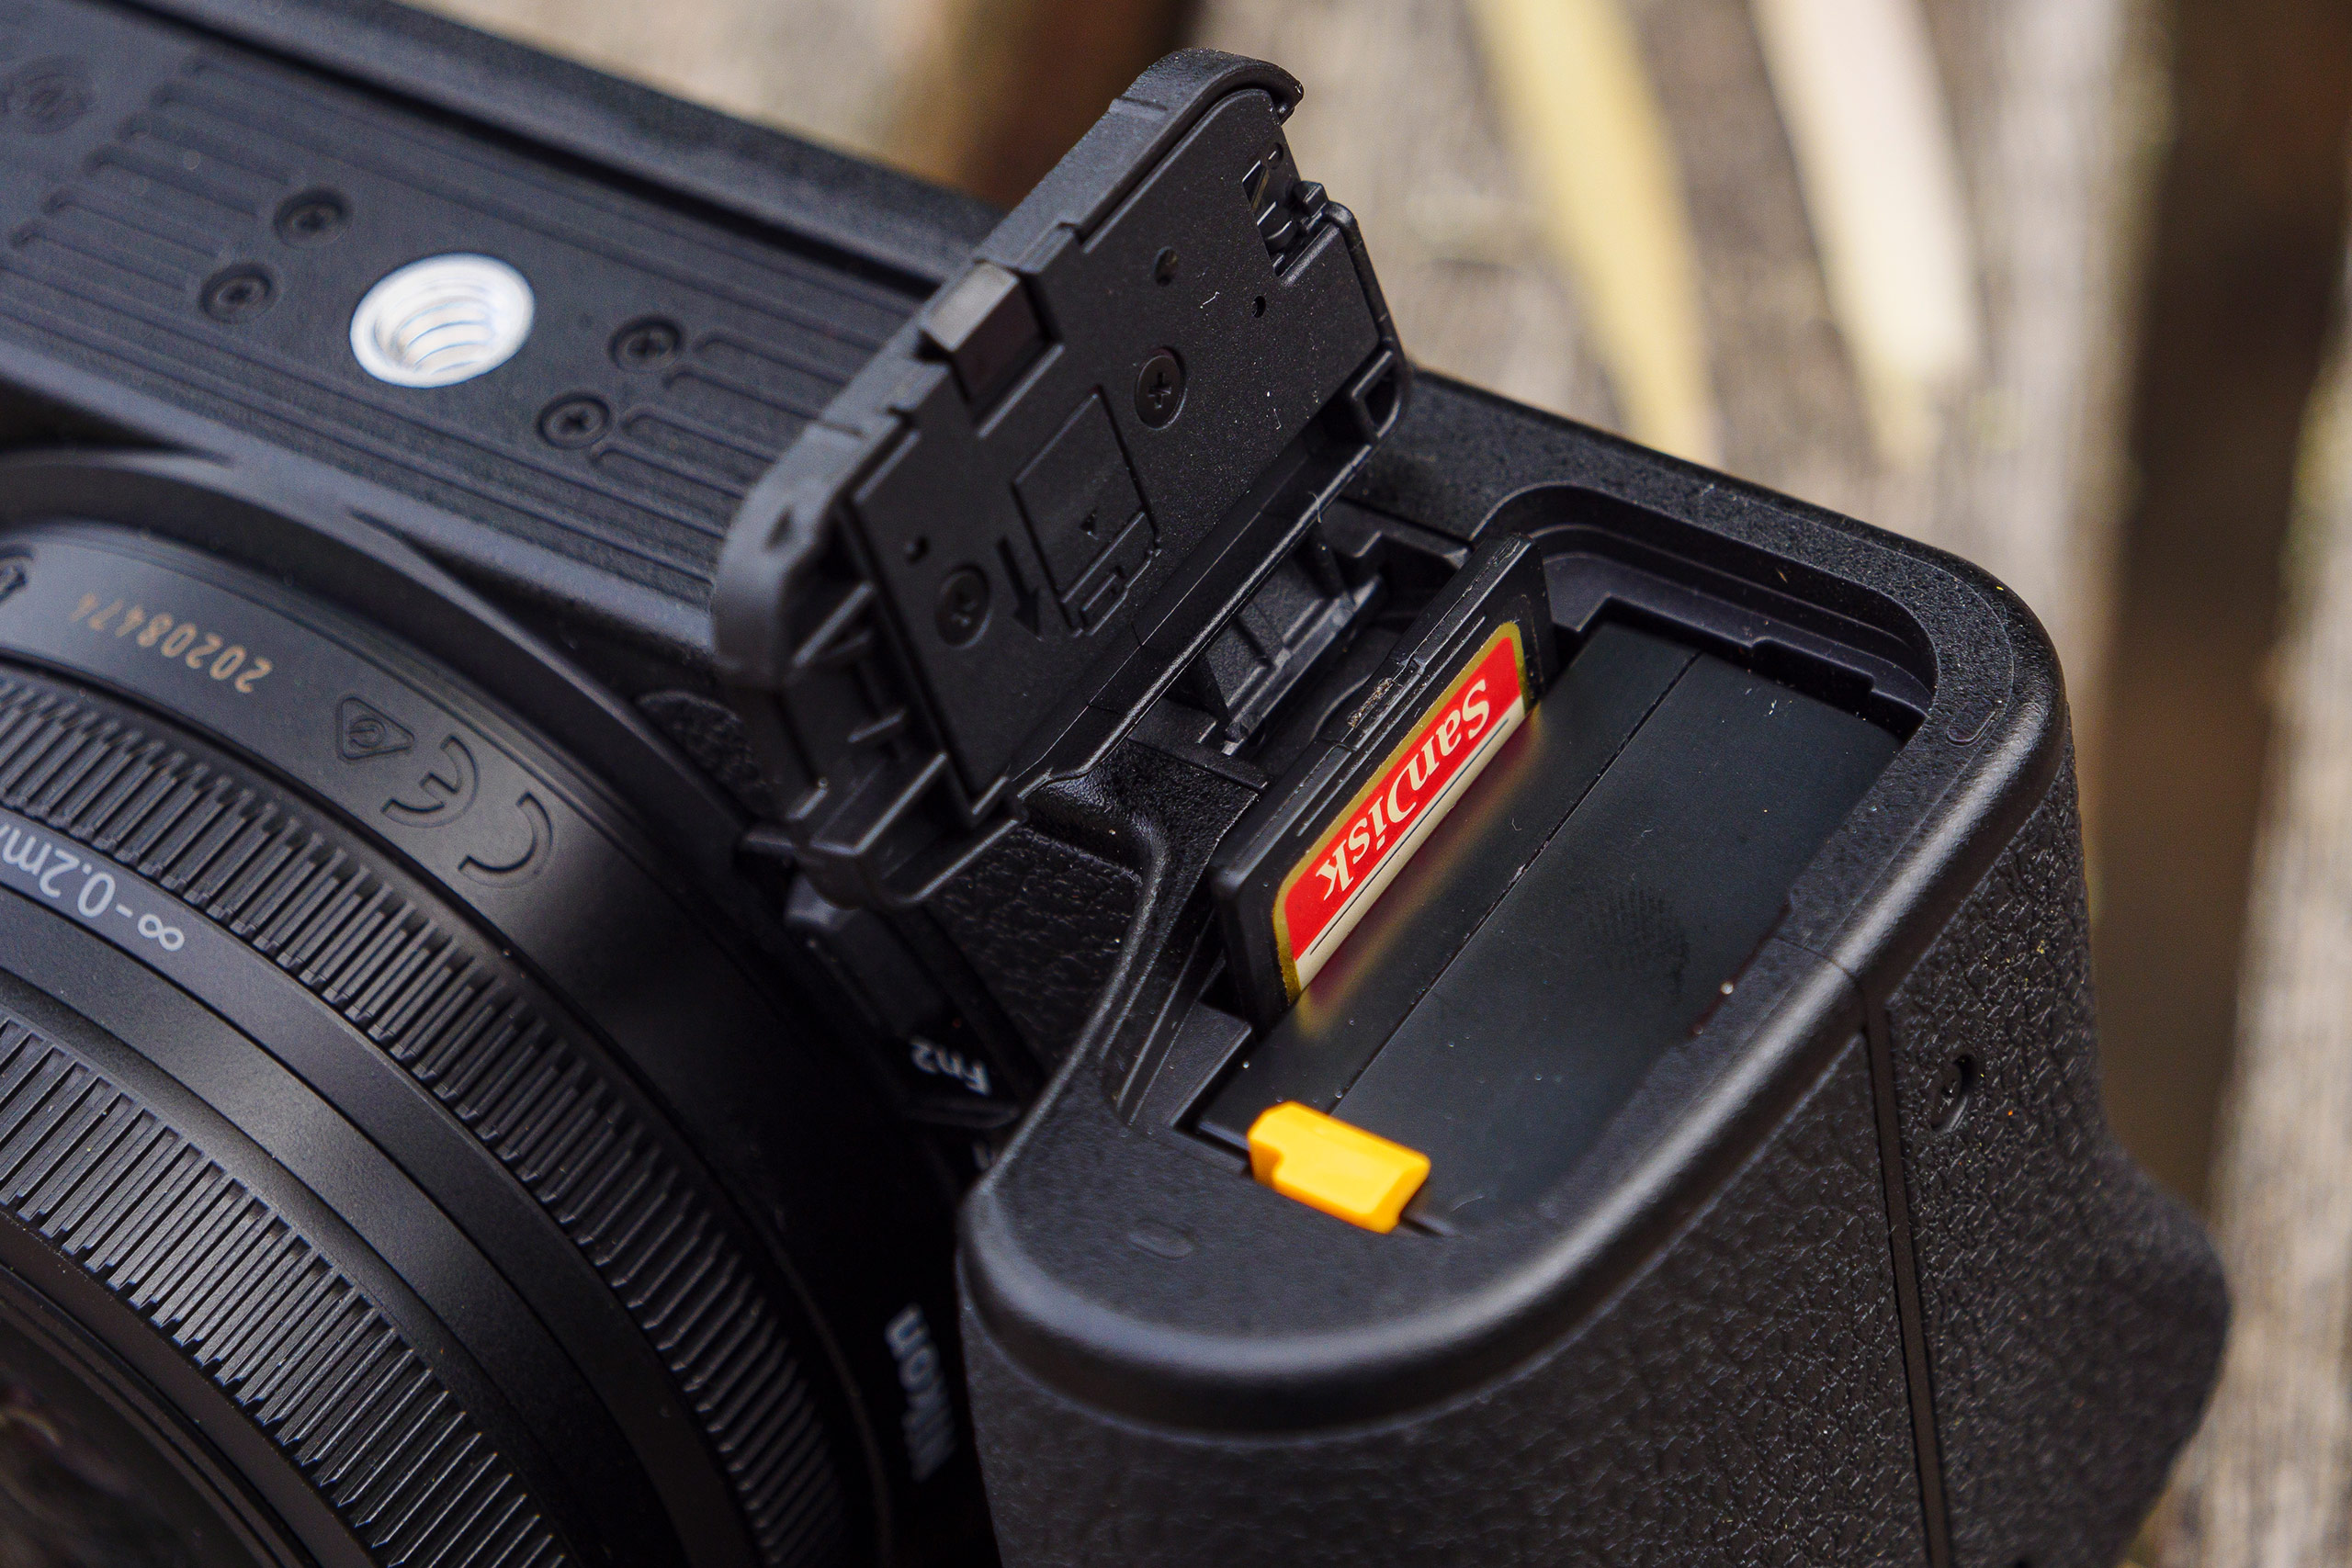 Z30 battery and memory card compartment. Photo: Tim Coleman